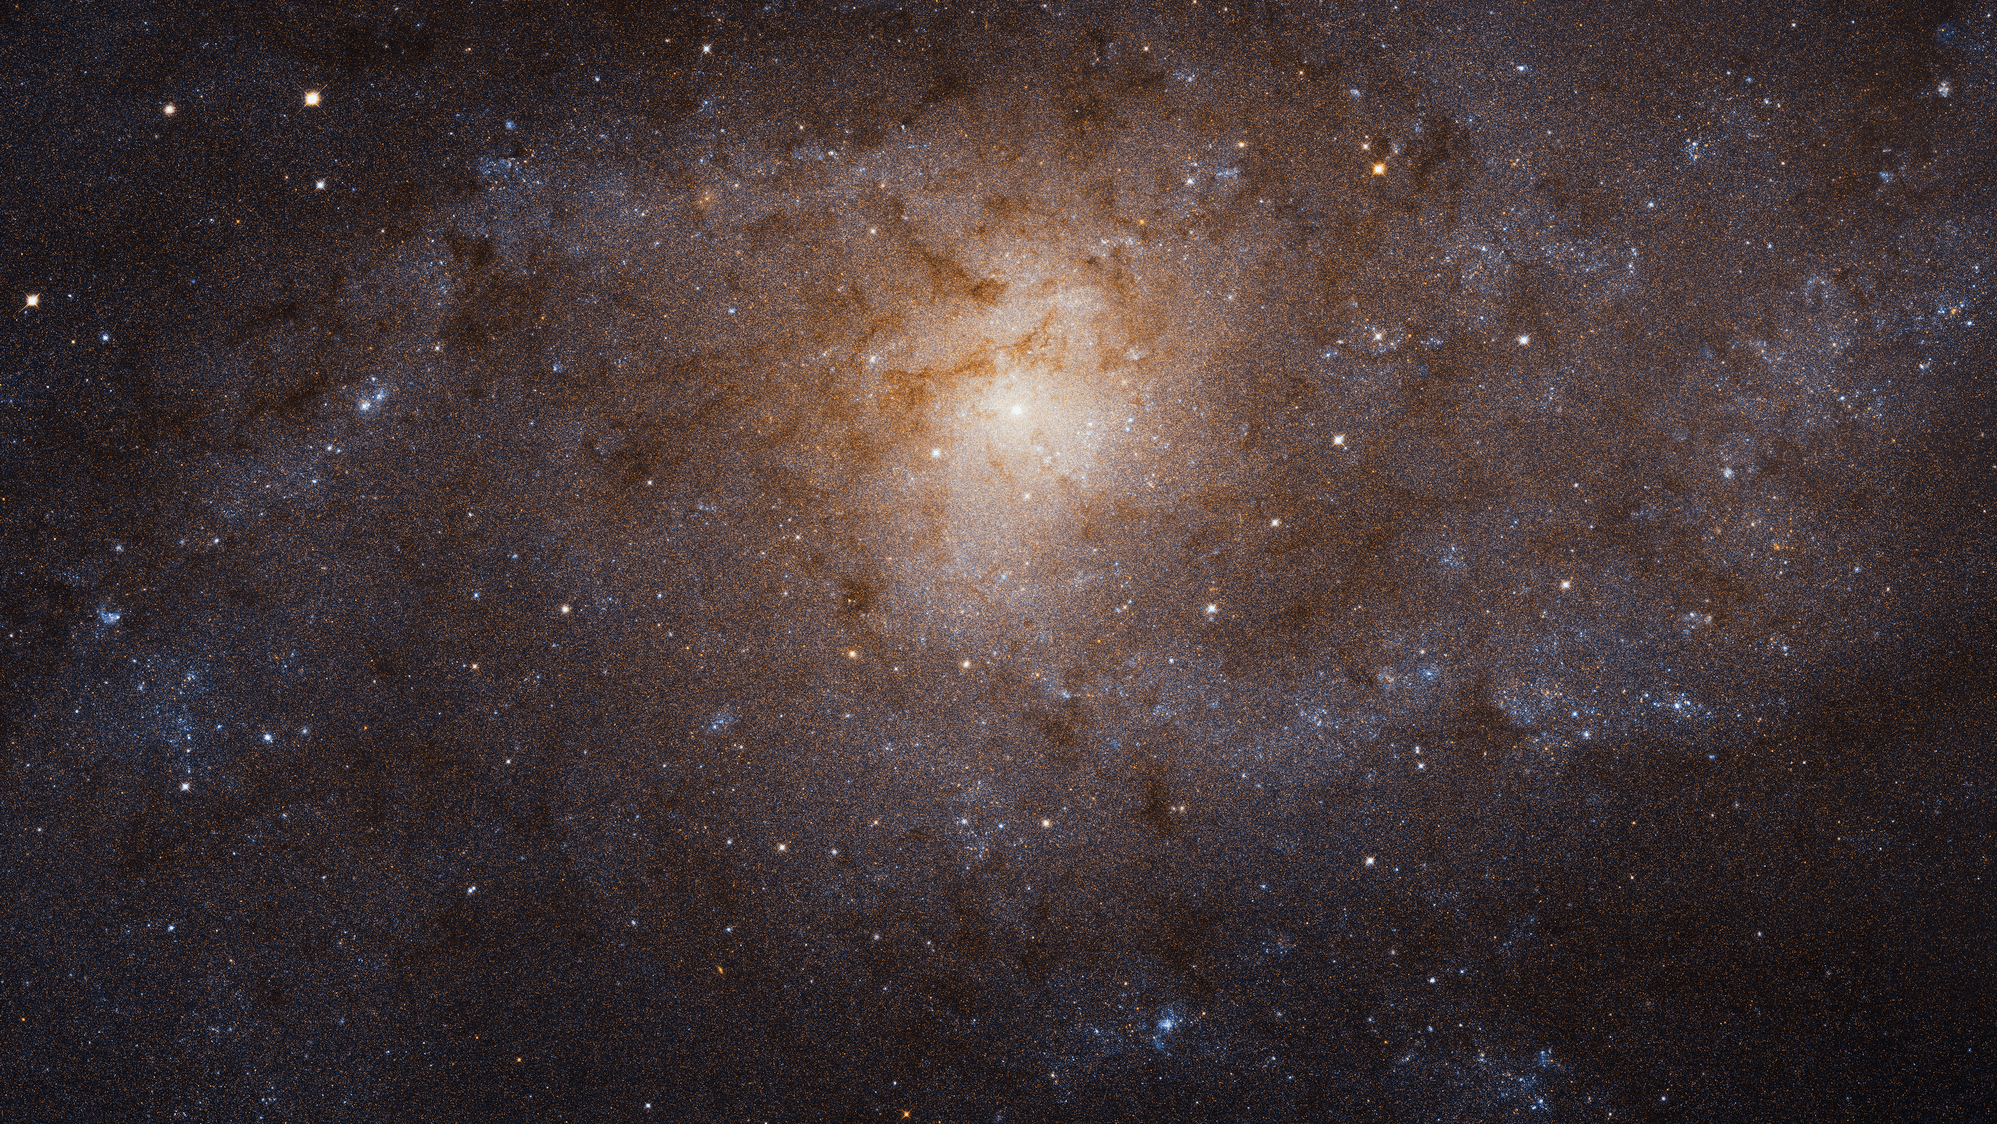 This bright galaxy shines with a yellowish core and is surrounded by dust and stars.